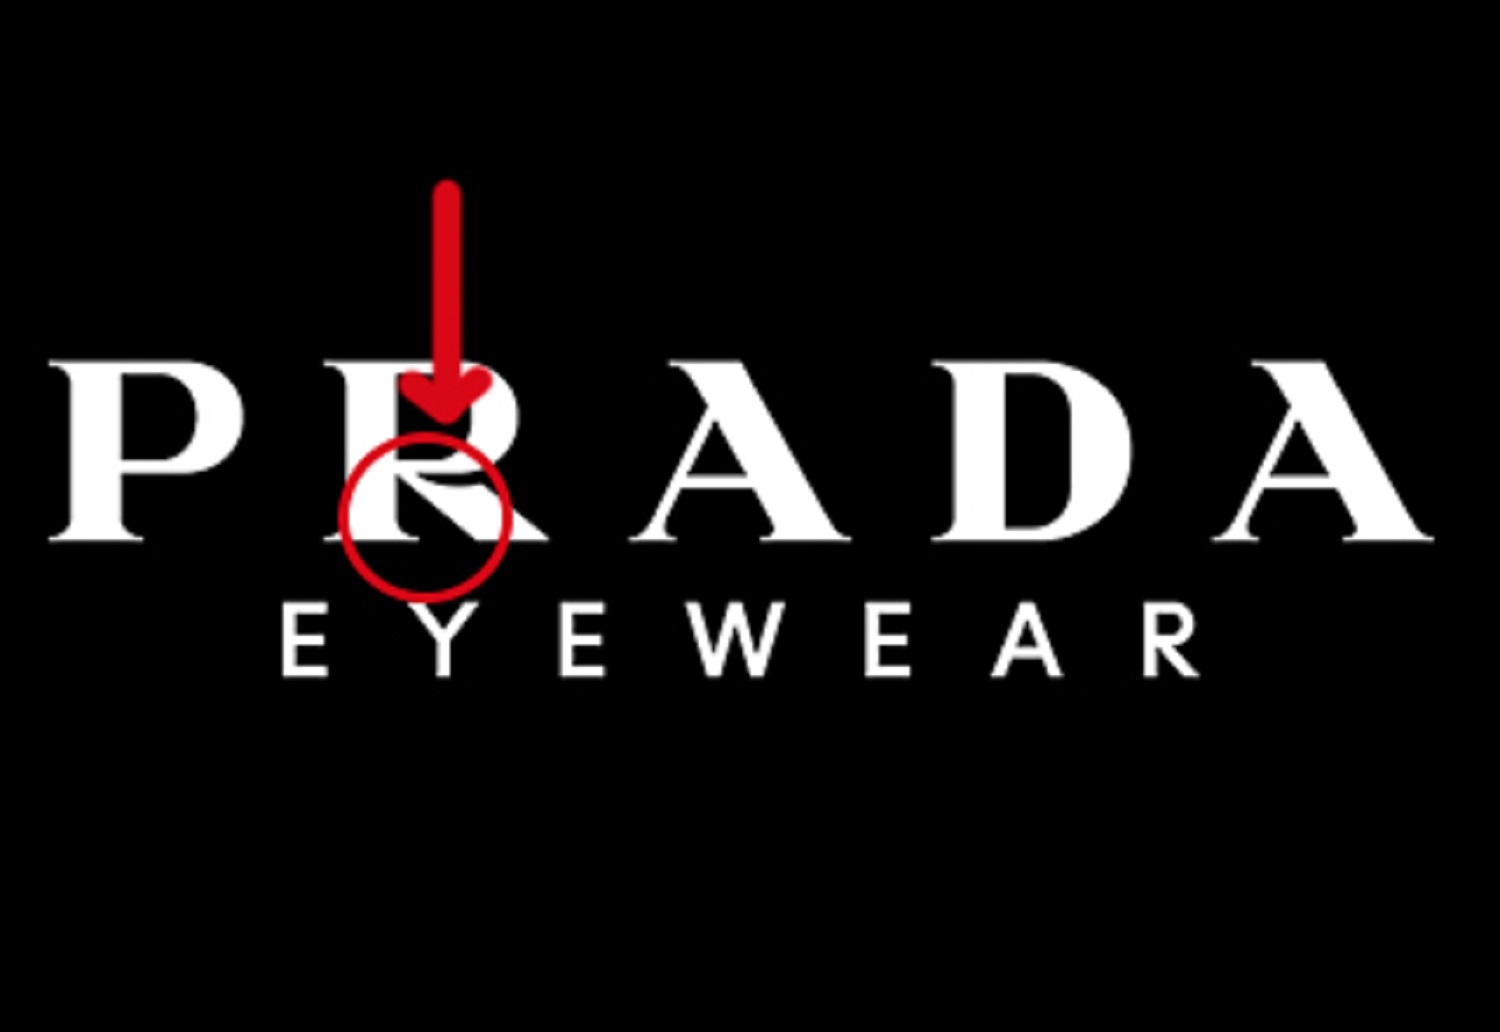 how can you tell if prada sunglasses are real